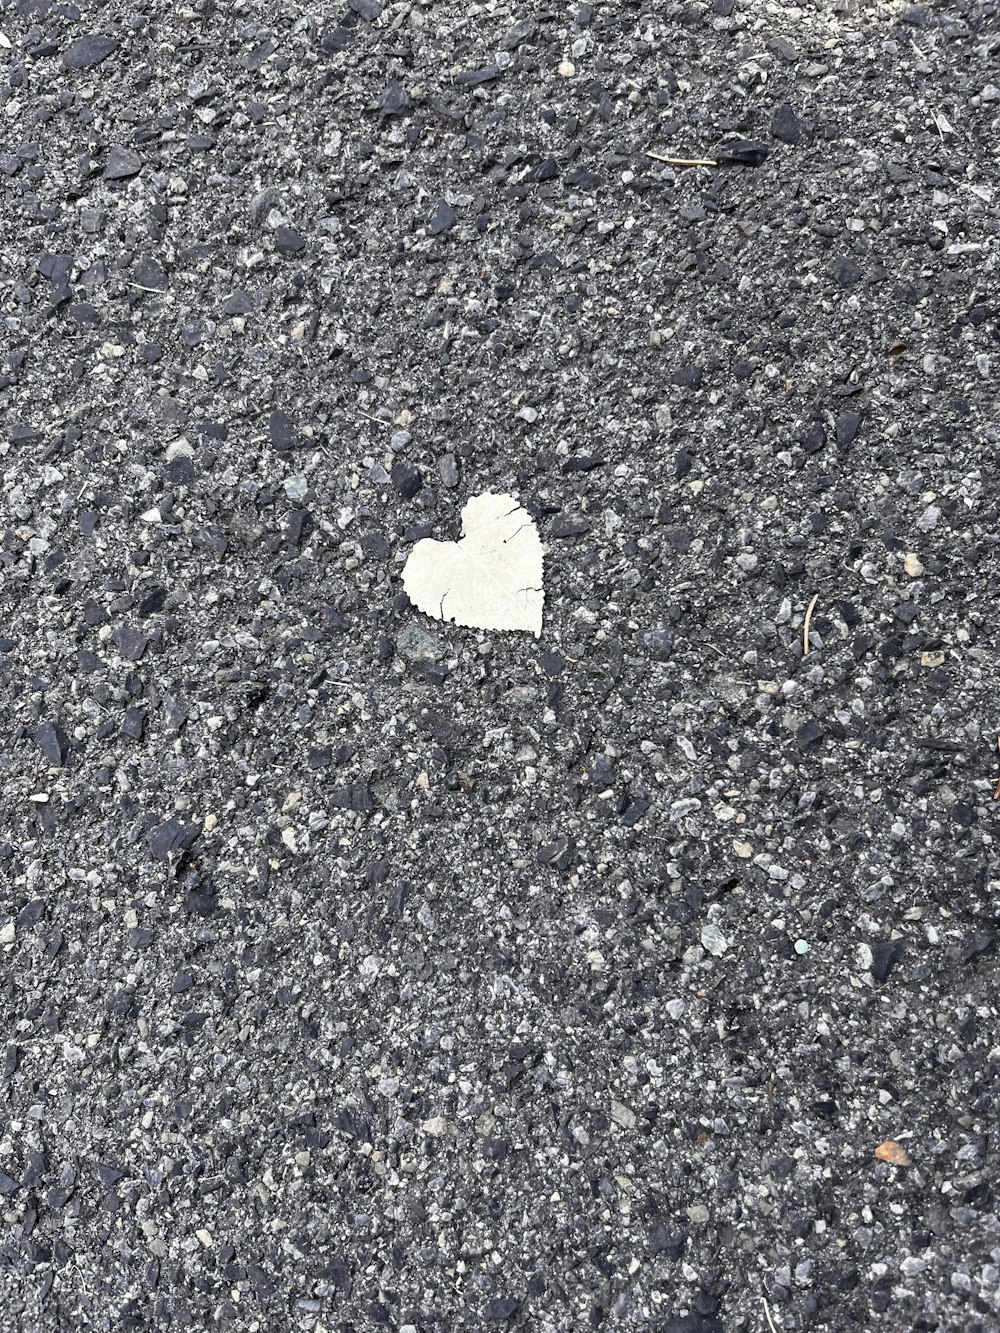 a heart shaped piece of paper on the ground